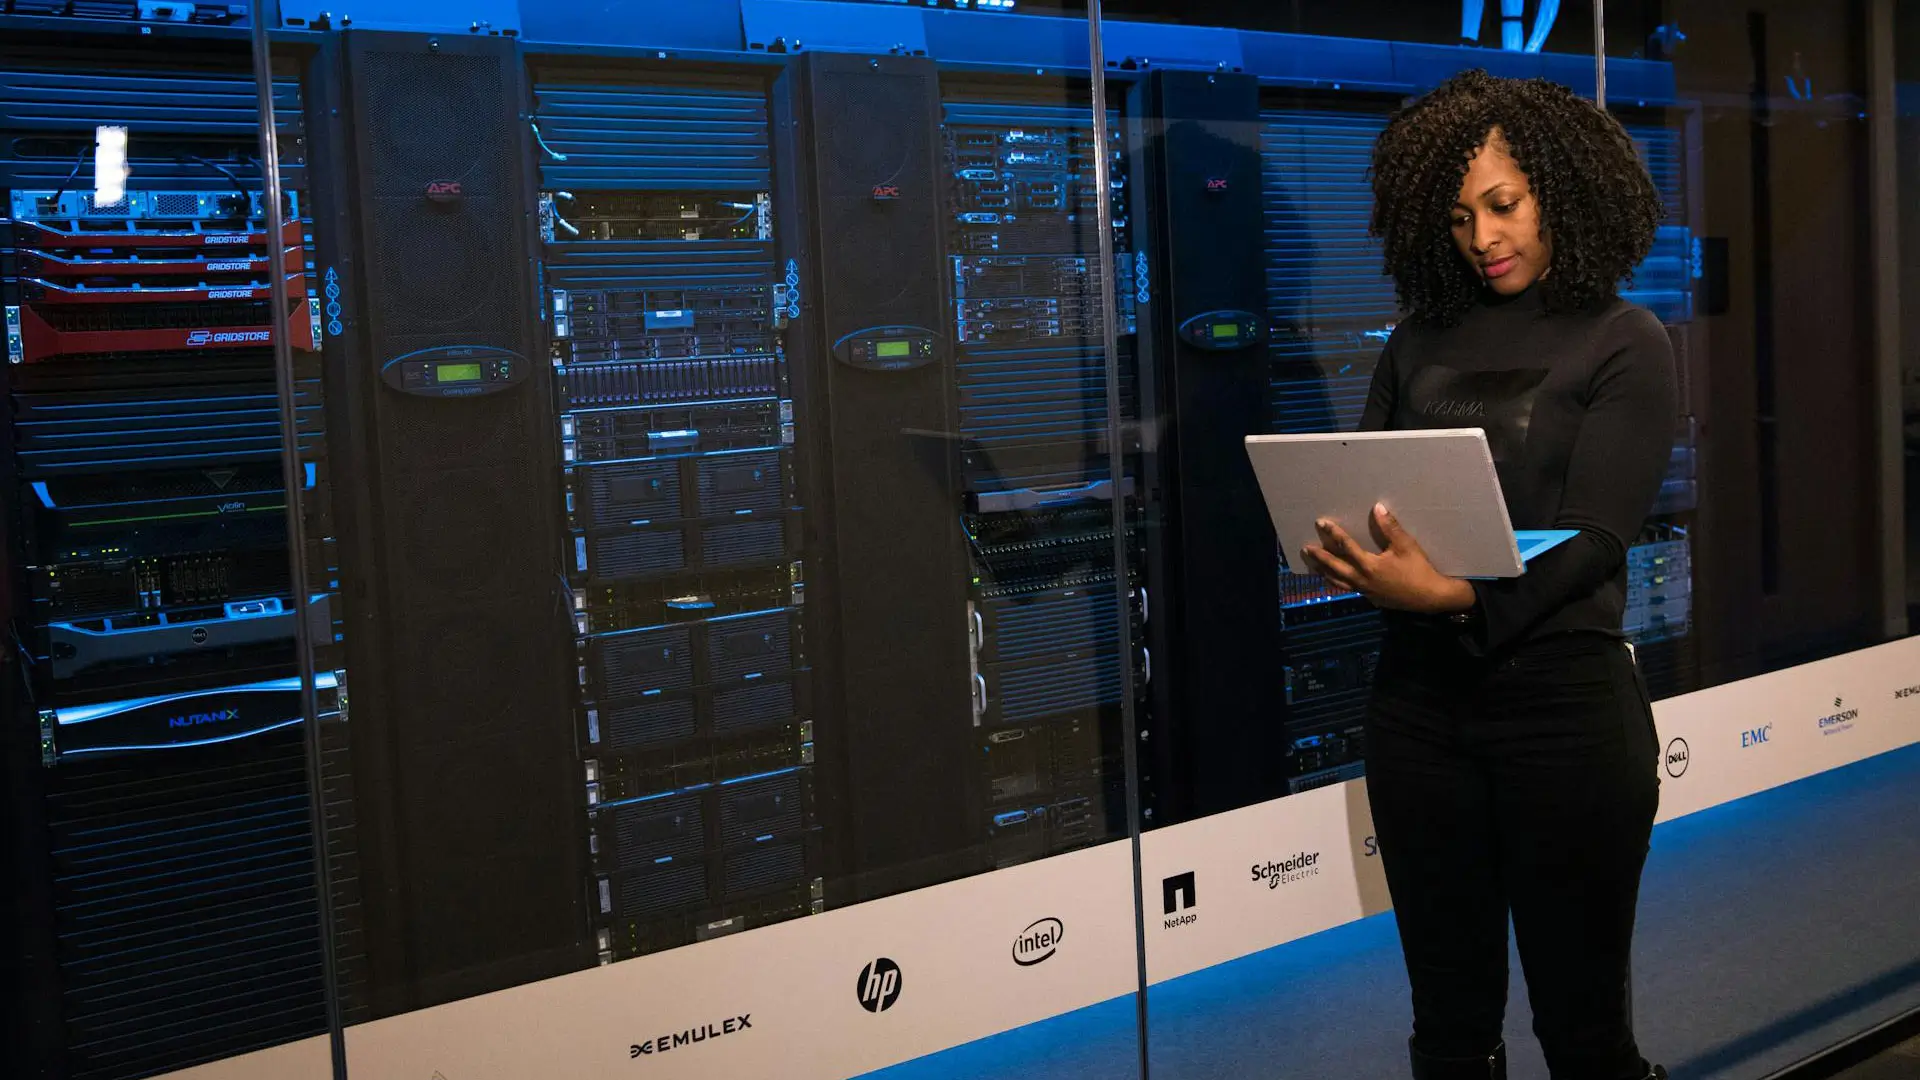 Woman using a laptop standing in front of a data centre server rack.